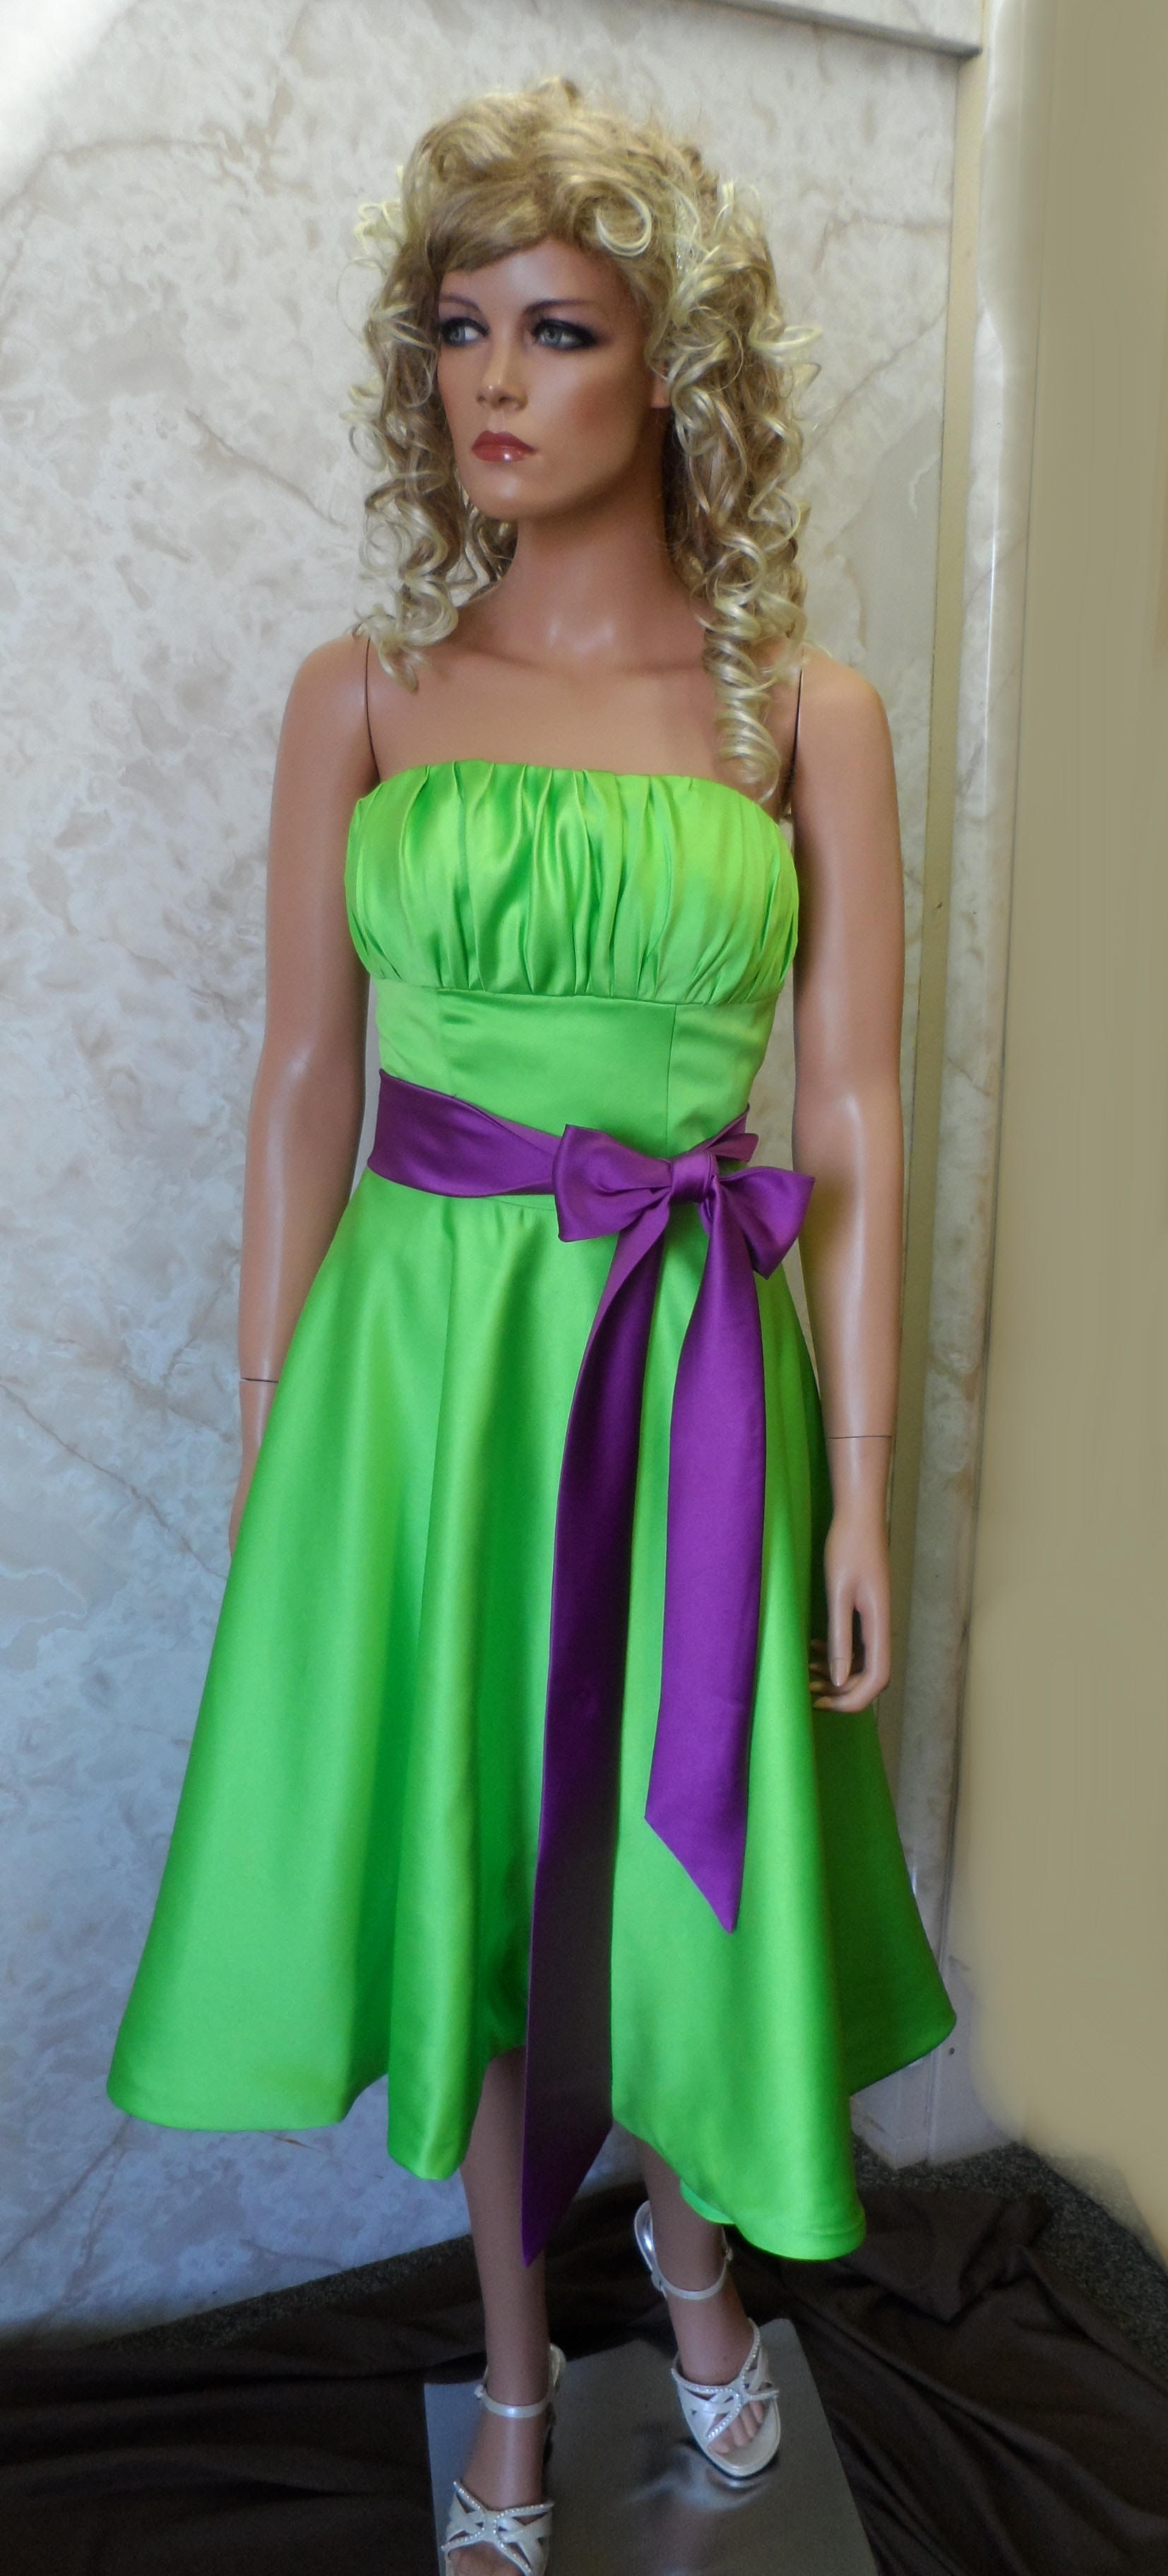 Lime green strapless dress with purple sash